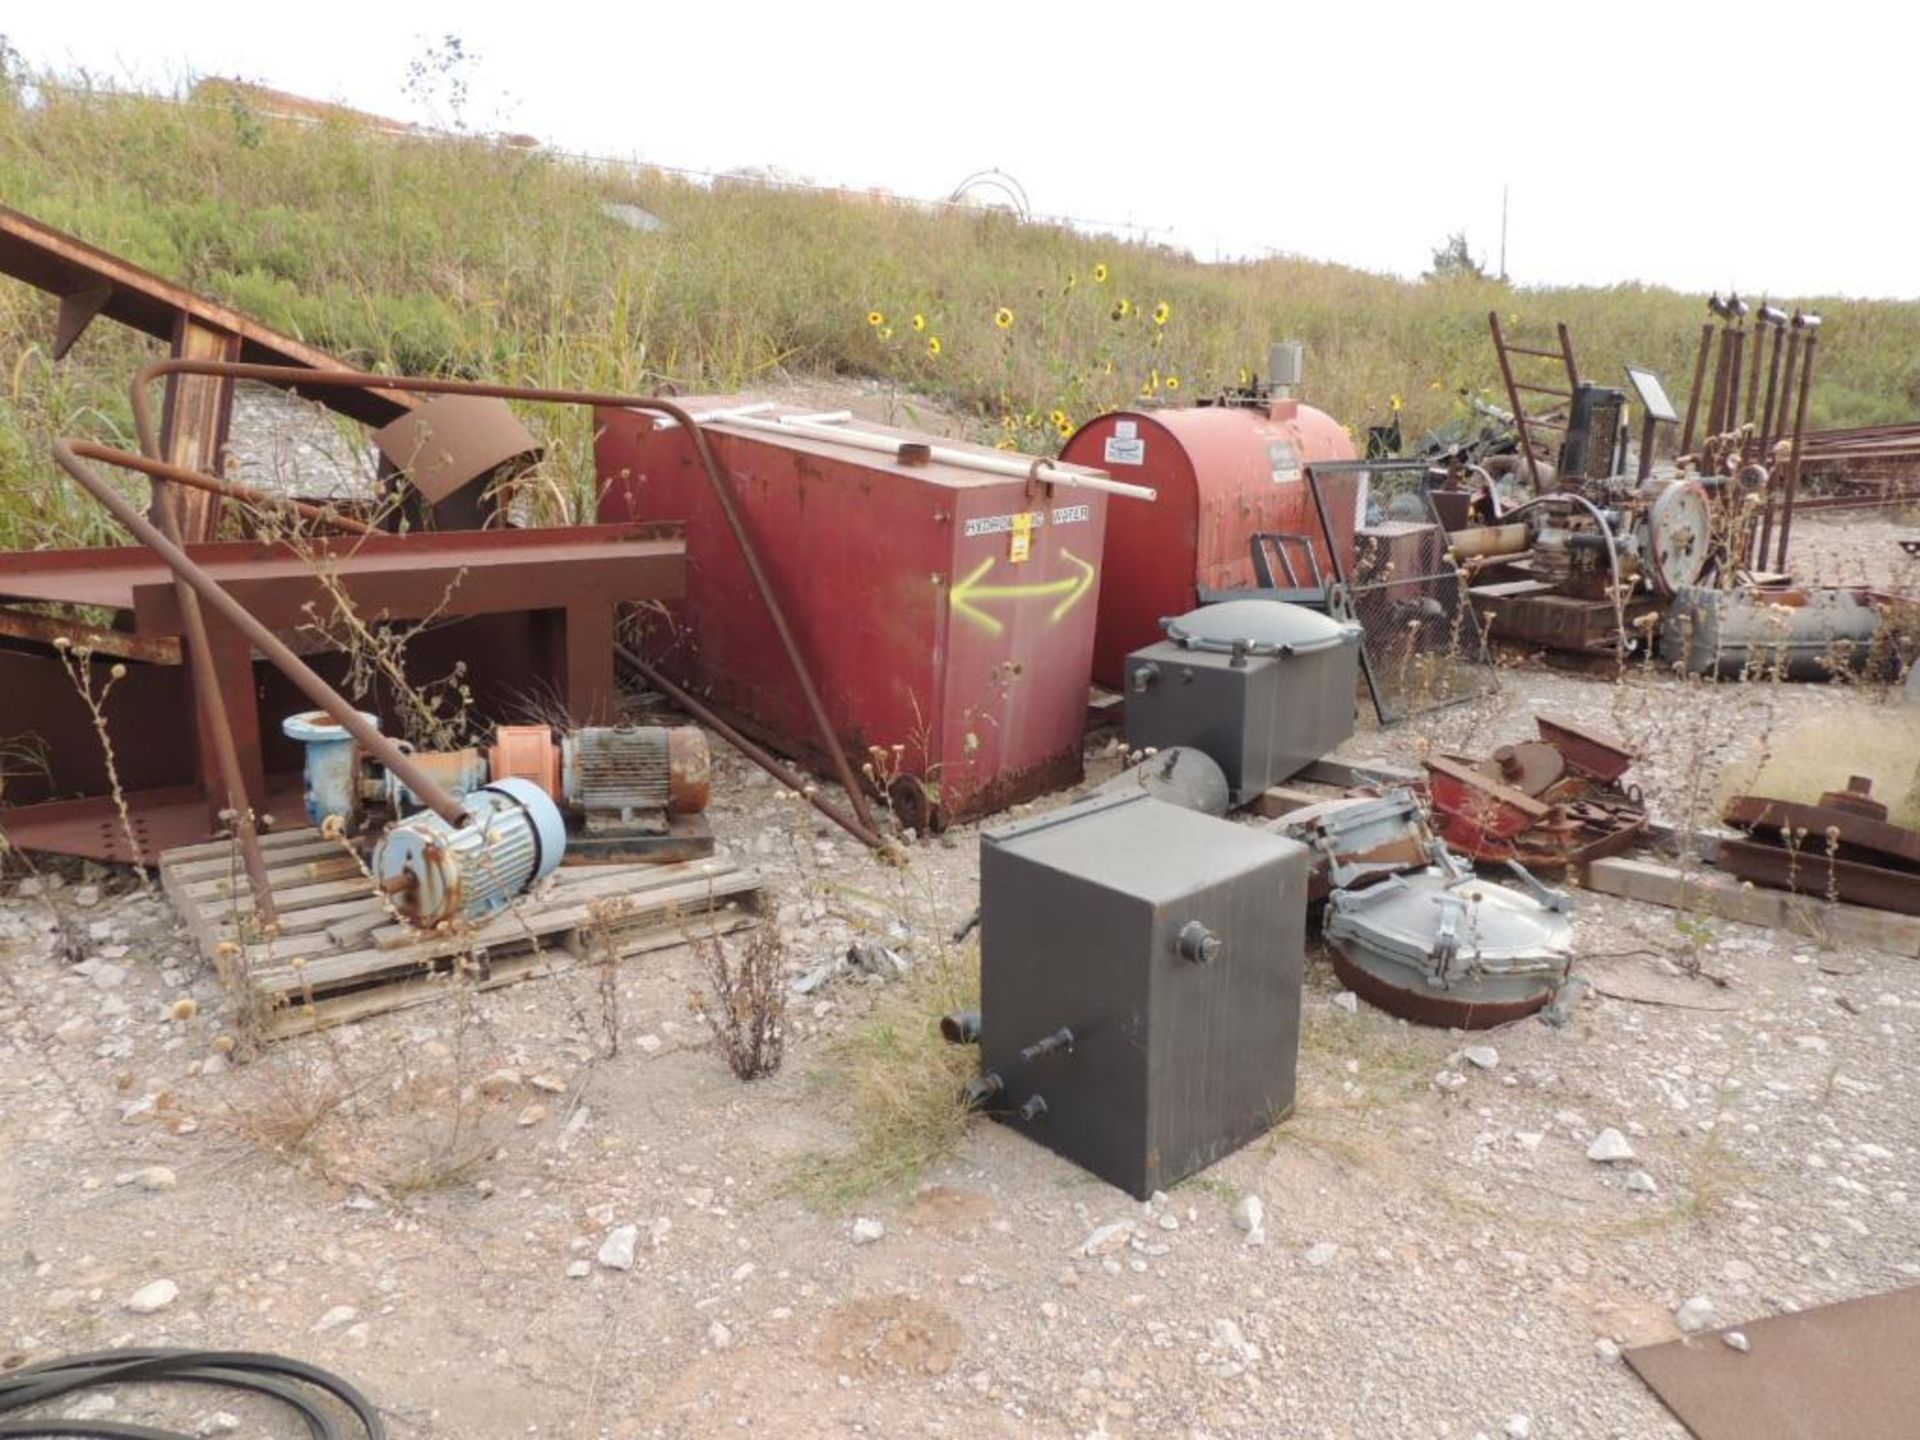 LOT: Assorted Used equipment, Pumps, Engines, Drawworks, Pipe, Drilling Platform, Scrap (Located Low